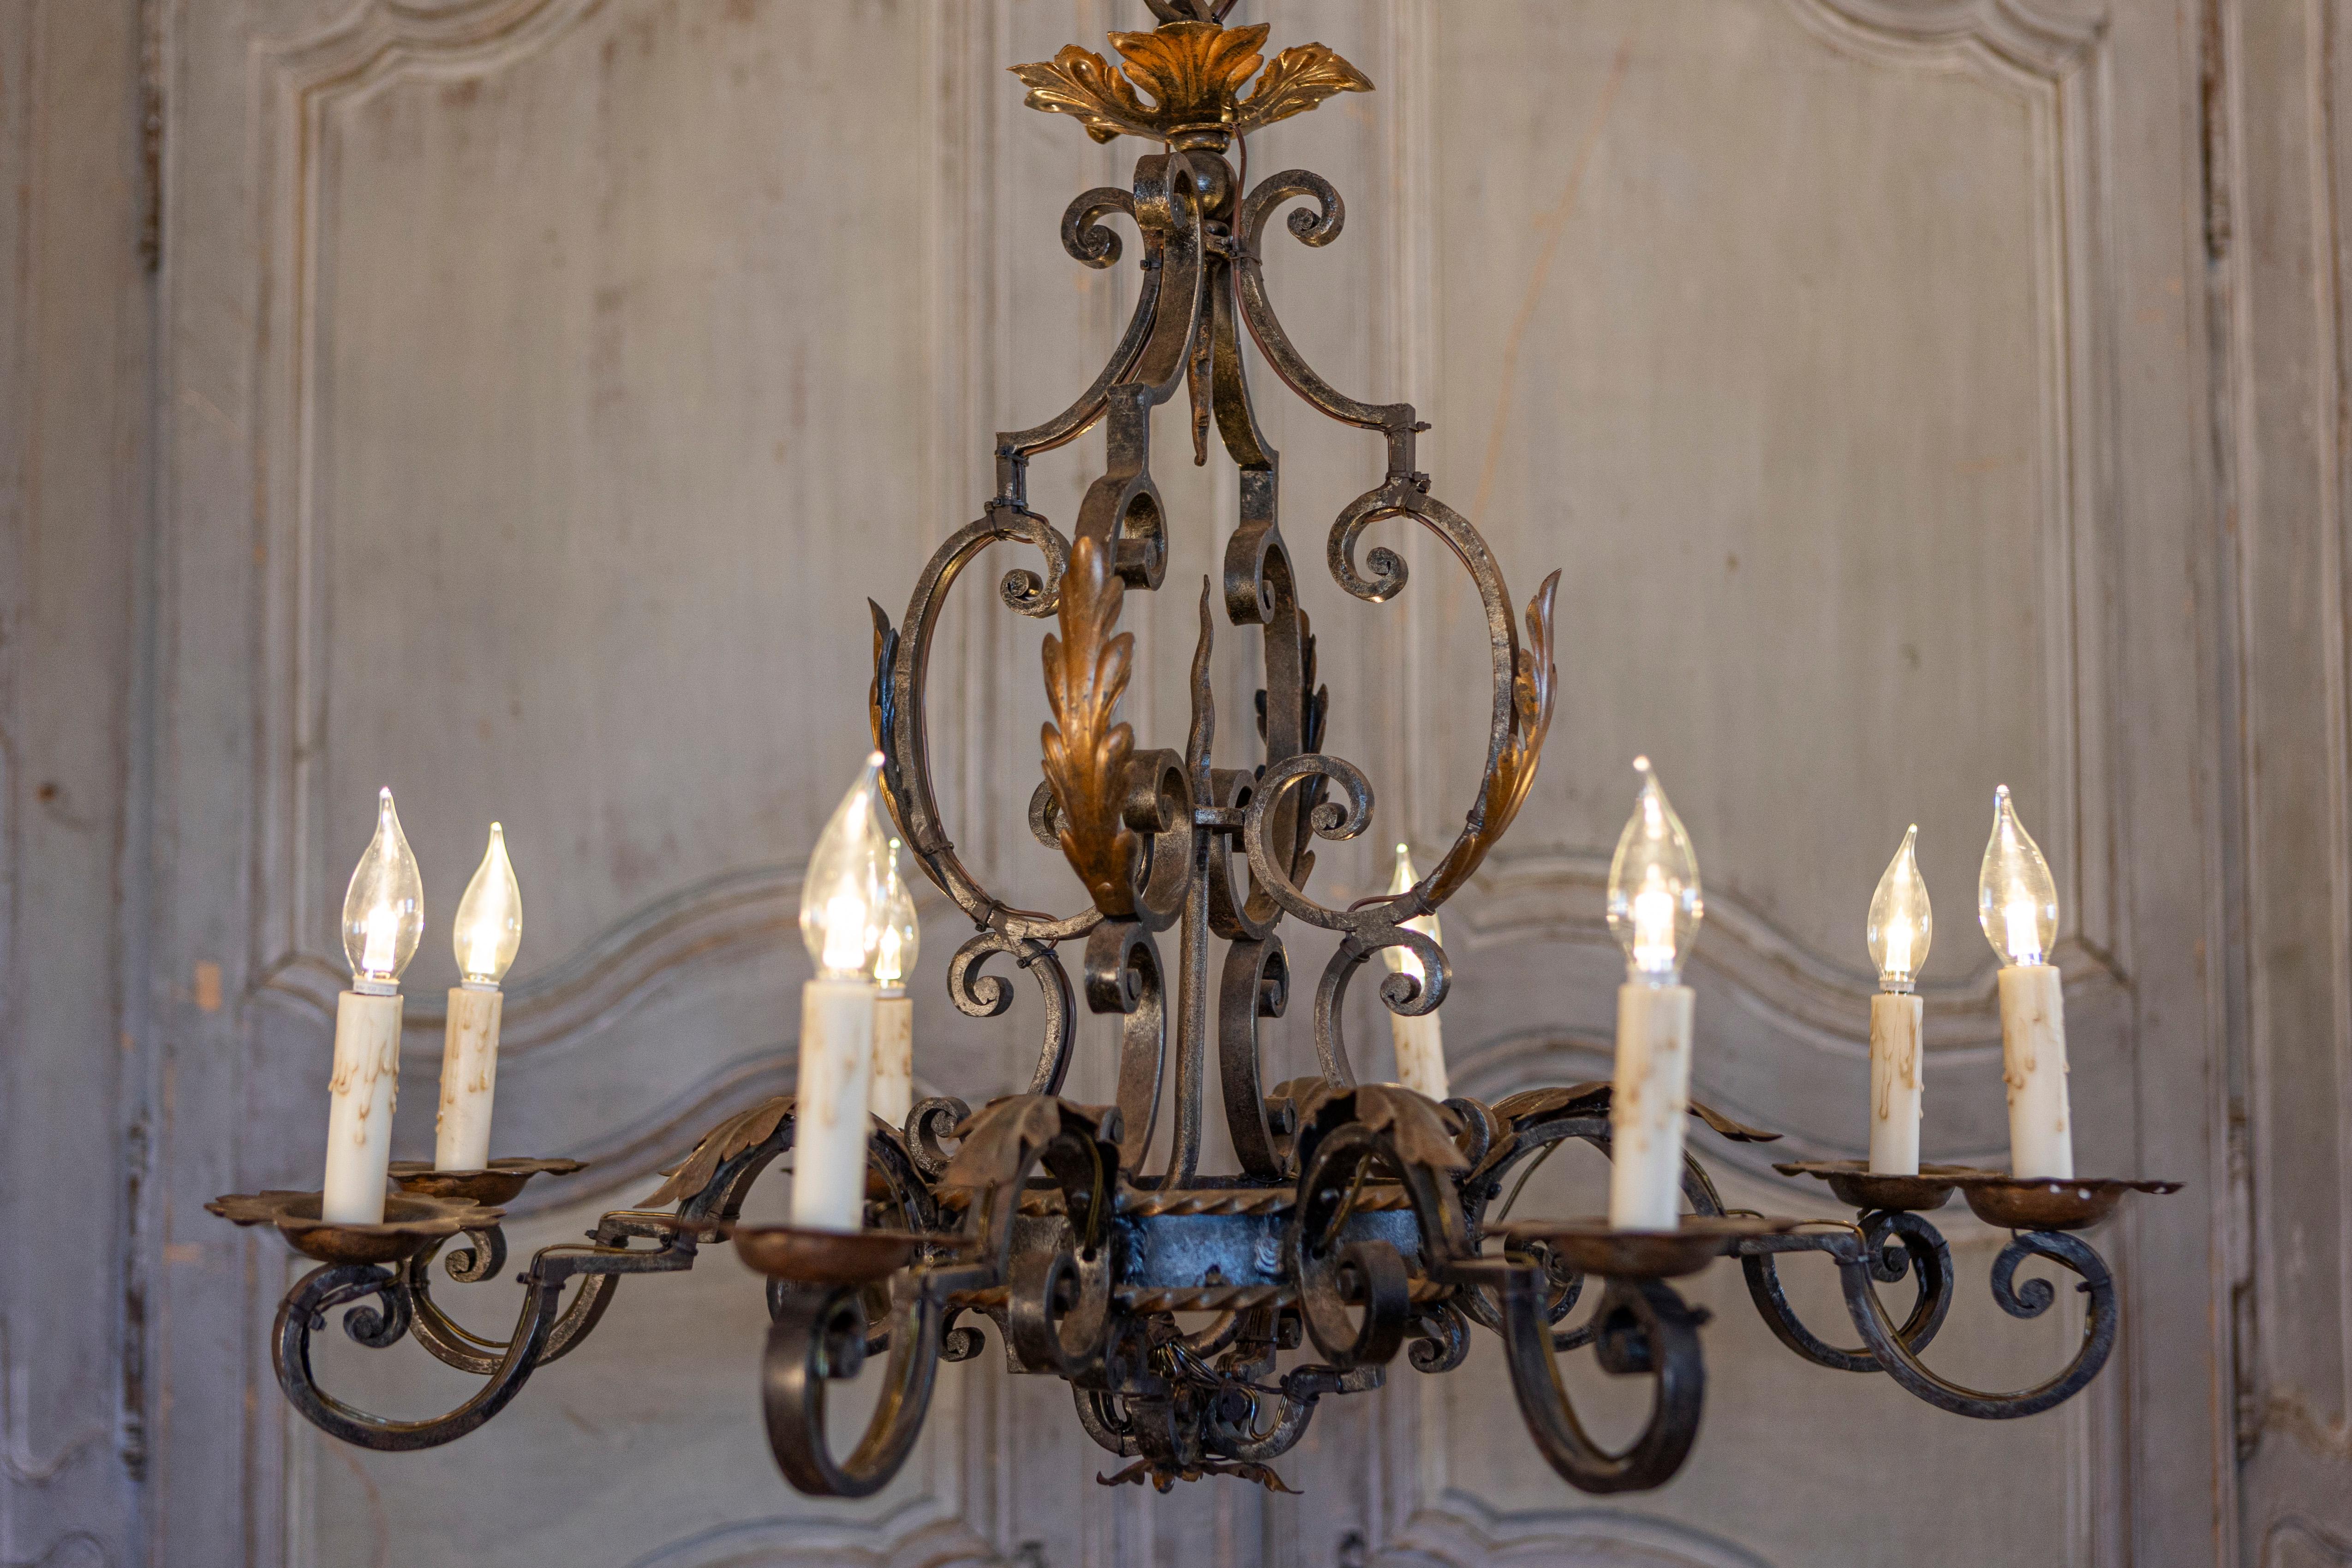 A French wrought iron eight-light chandelier from the 20th century with scrolling arms and acanthus leaf motifs. This captivating French wrought iron chandelier, hailing from the 20th century, serves as a testament to timeless craftsmanship and